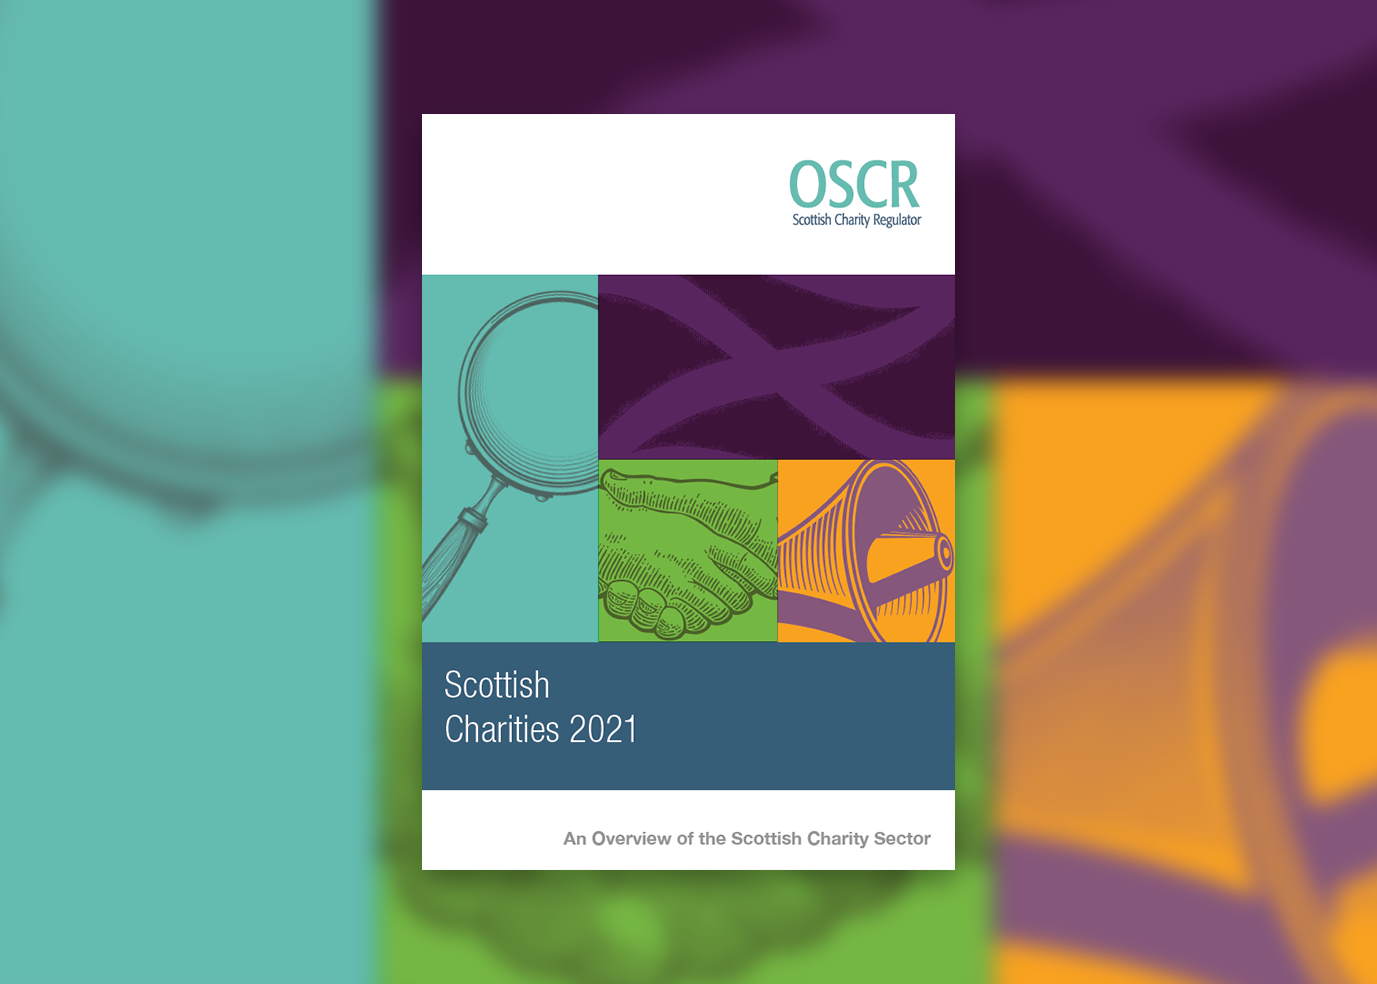 OSCR publishes new research on Scottish charity sector